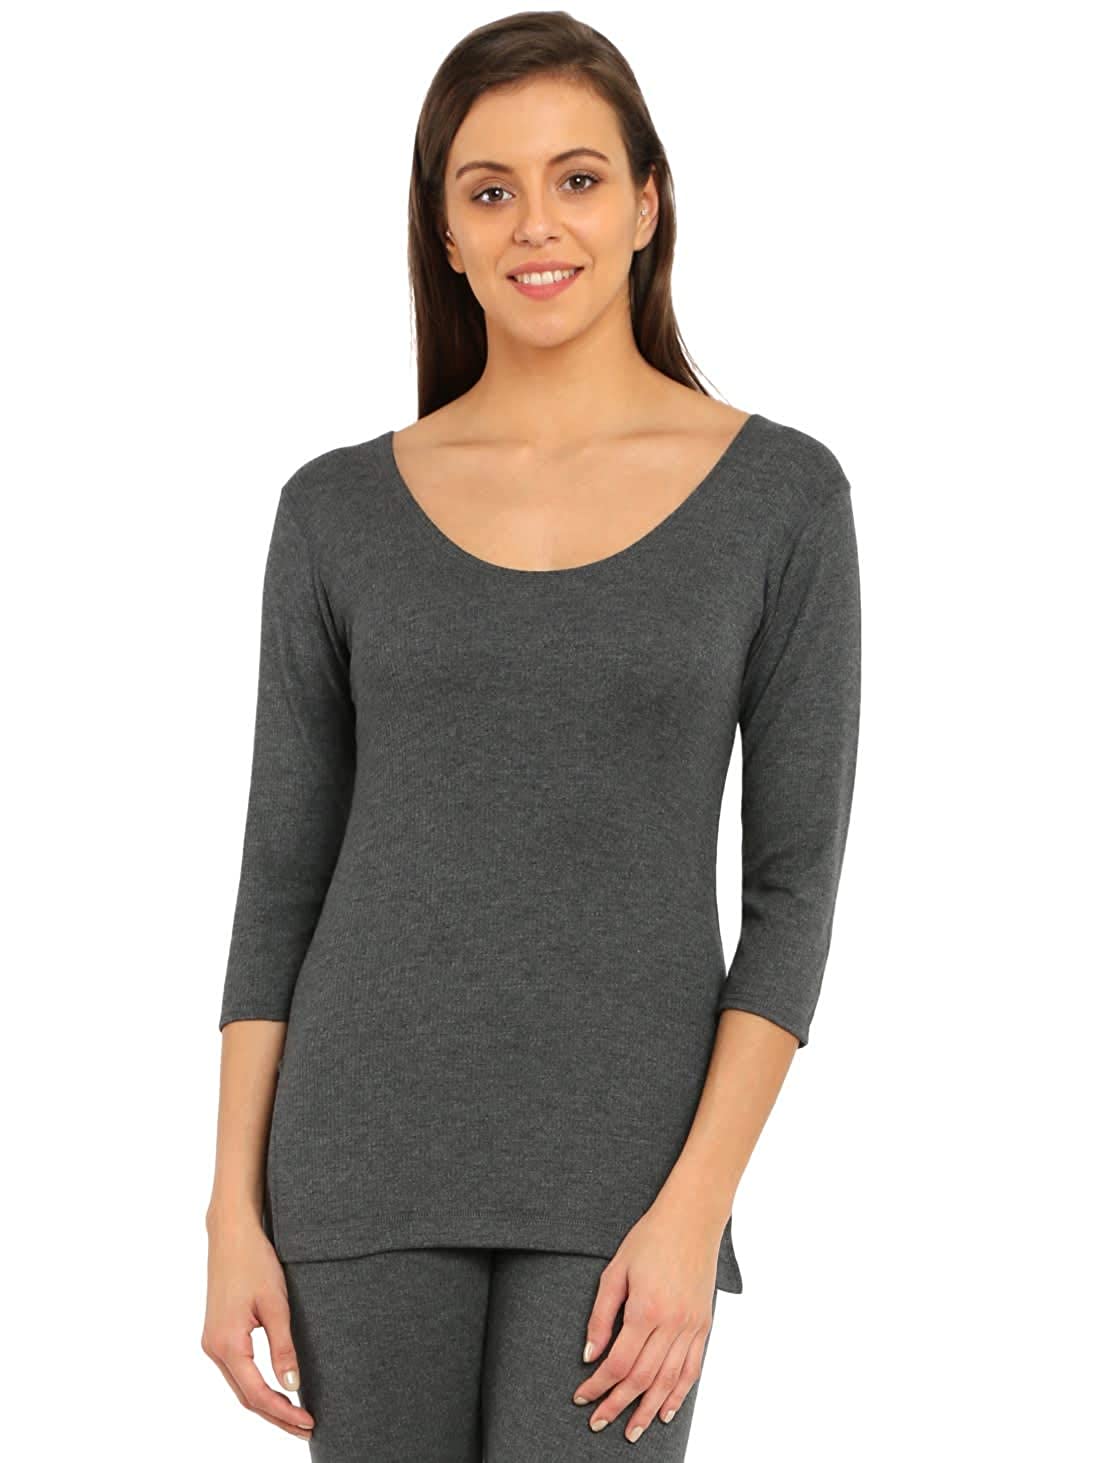 Jockey Thermal Wear for Ladies at best price in India shop at Inwear.in